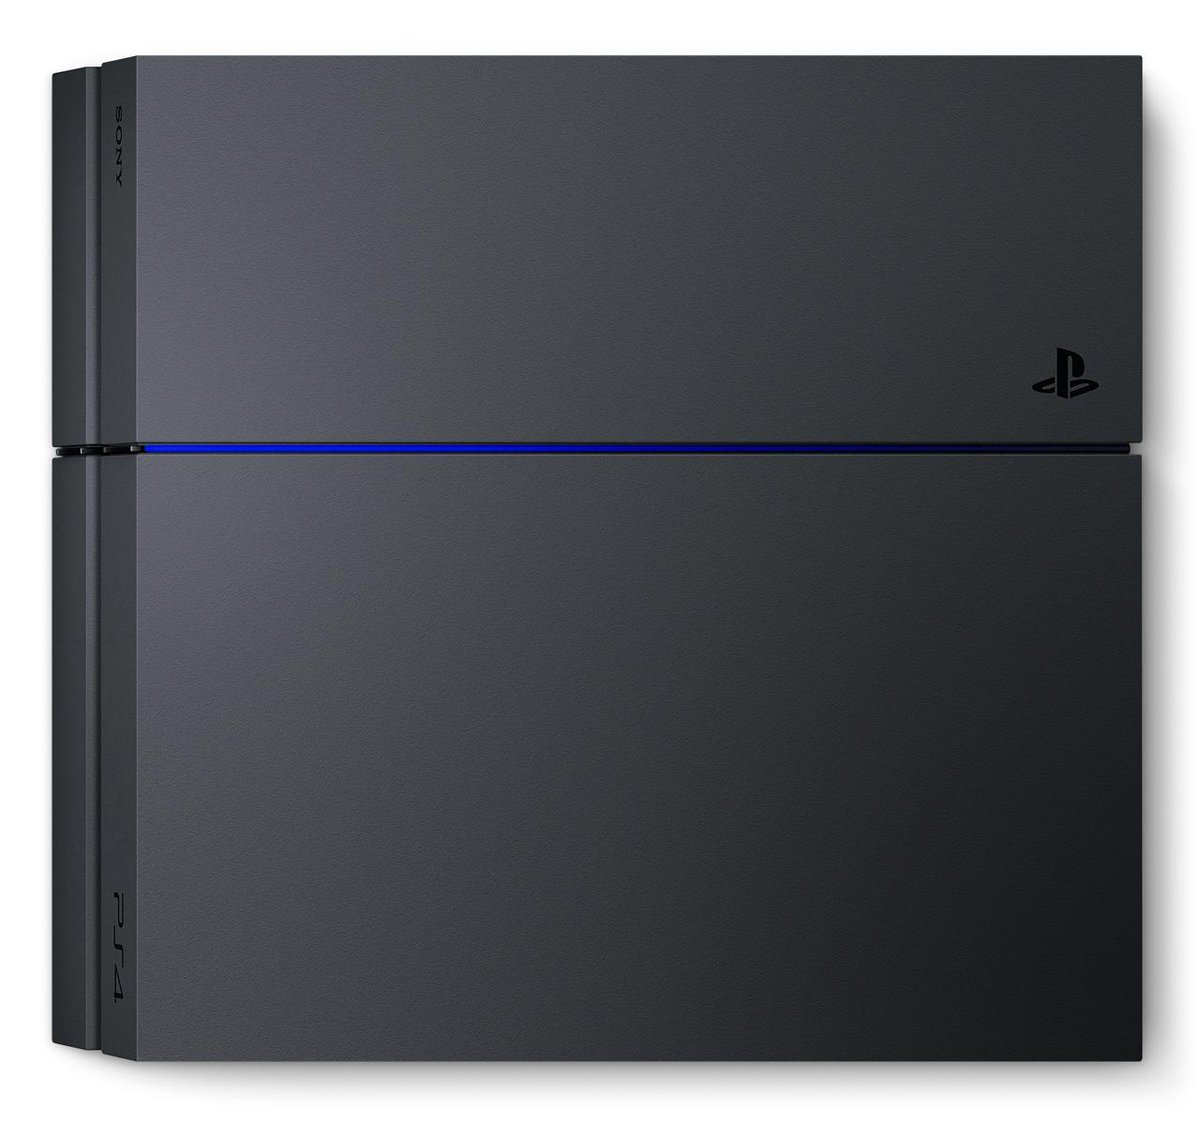 Hey, did you hear? Starting Friday, PS4 starts at $349.99! Pricing ...